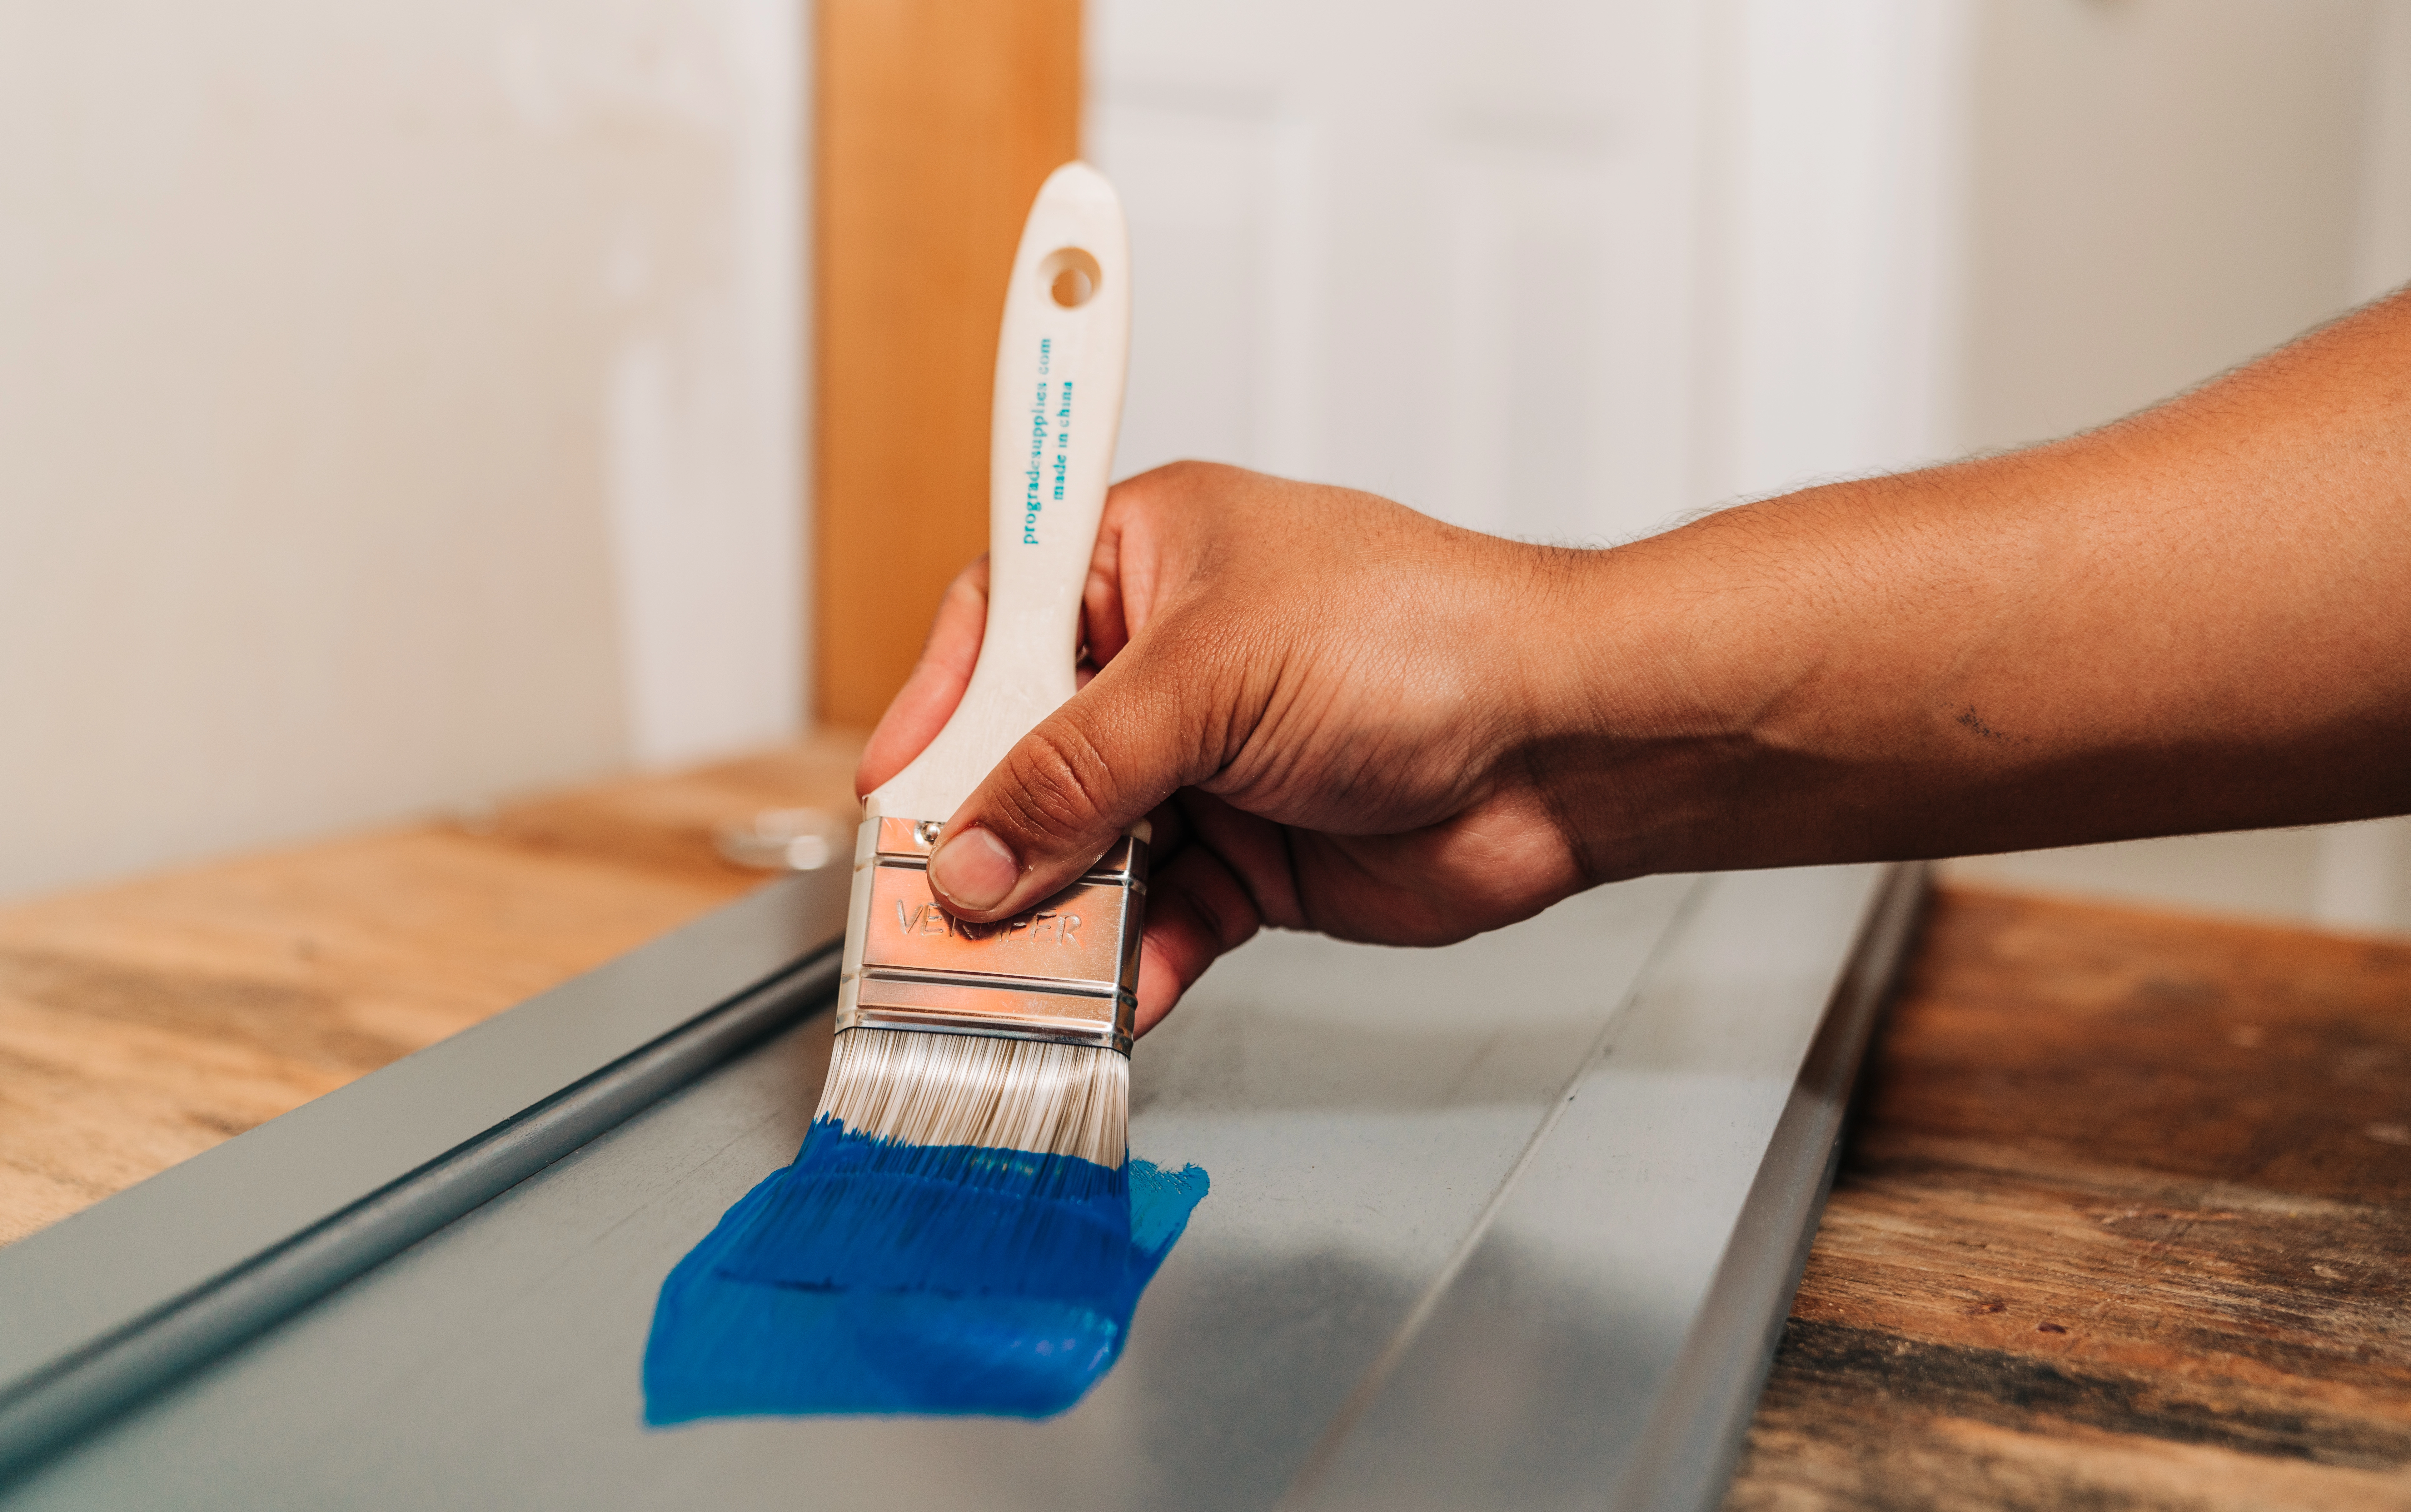 How To Clean Polyurethane Brush: Easy & Effective Tips